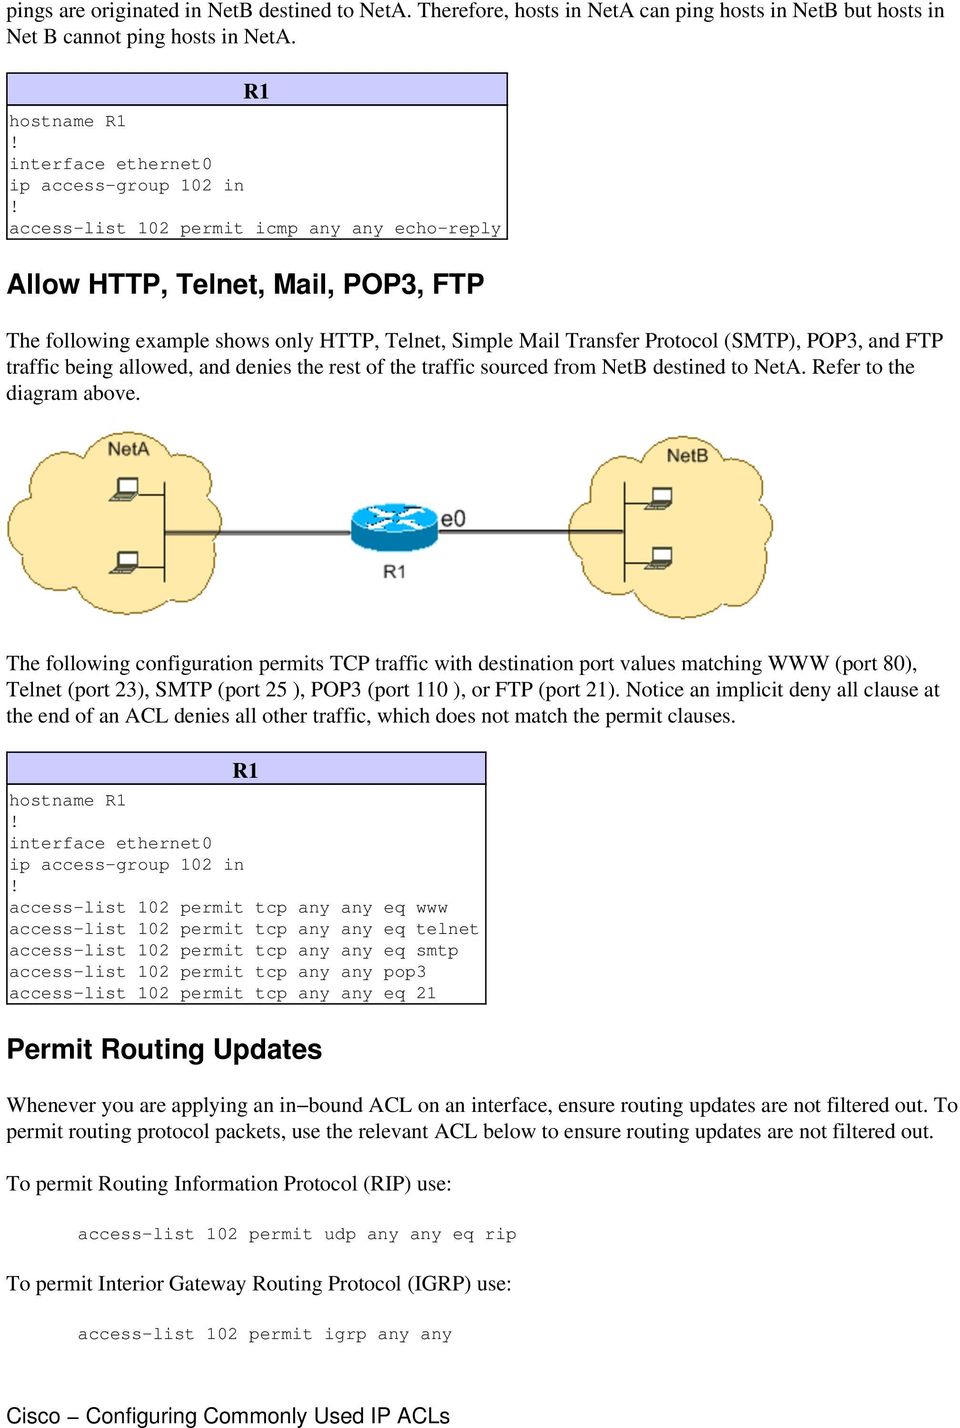 POP3, and FTP traffic being allowed, and denies the rest of the traffic sourced from NetB destined to NetA. Refer to the diagram above.